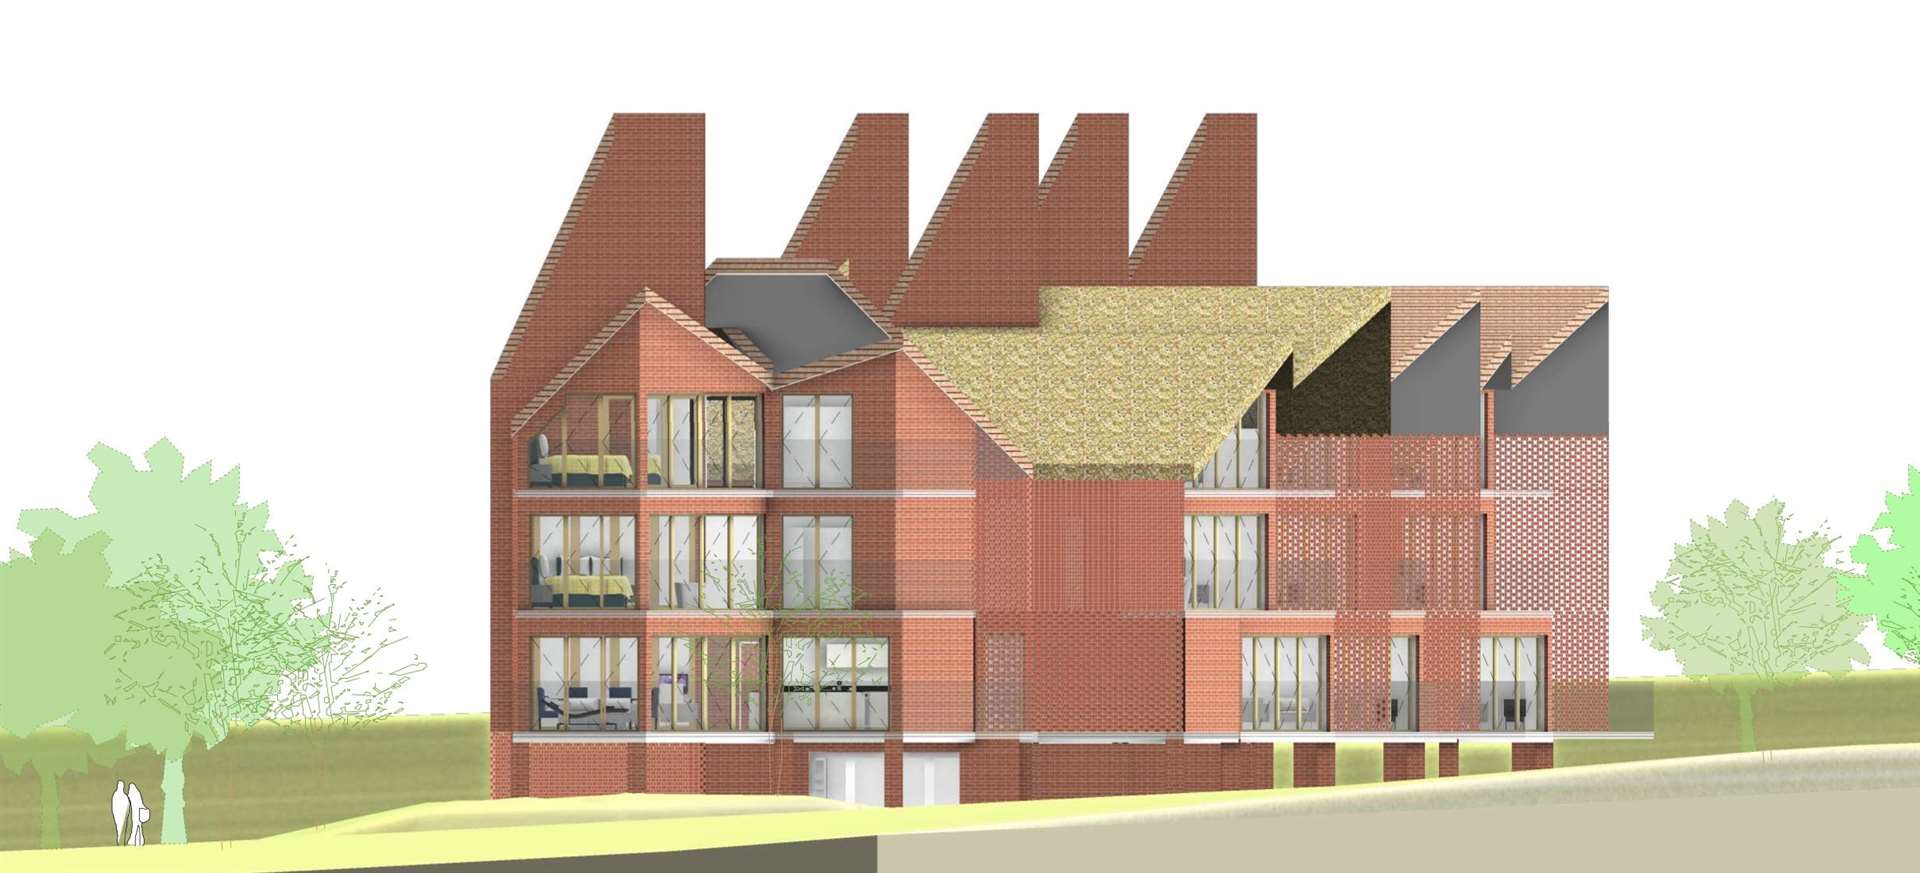 The proposals would see four homes built on land in Chislet, Canterbury